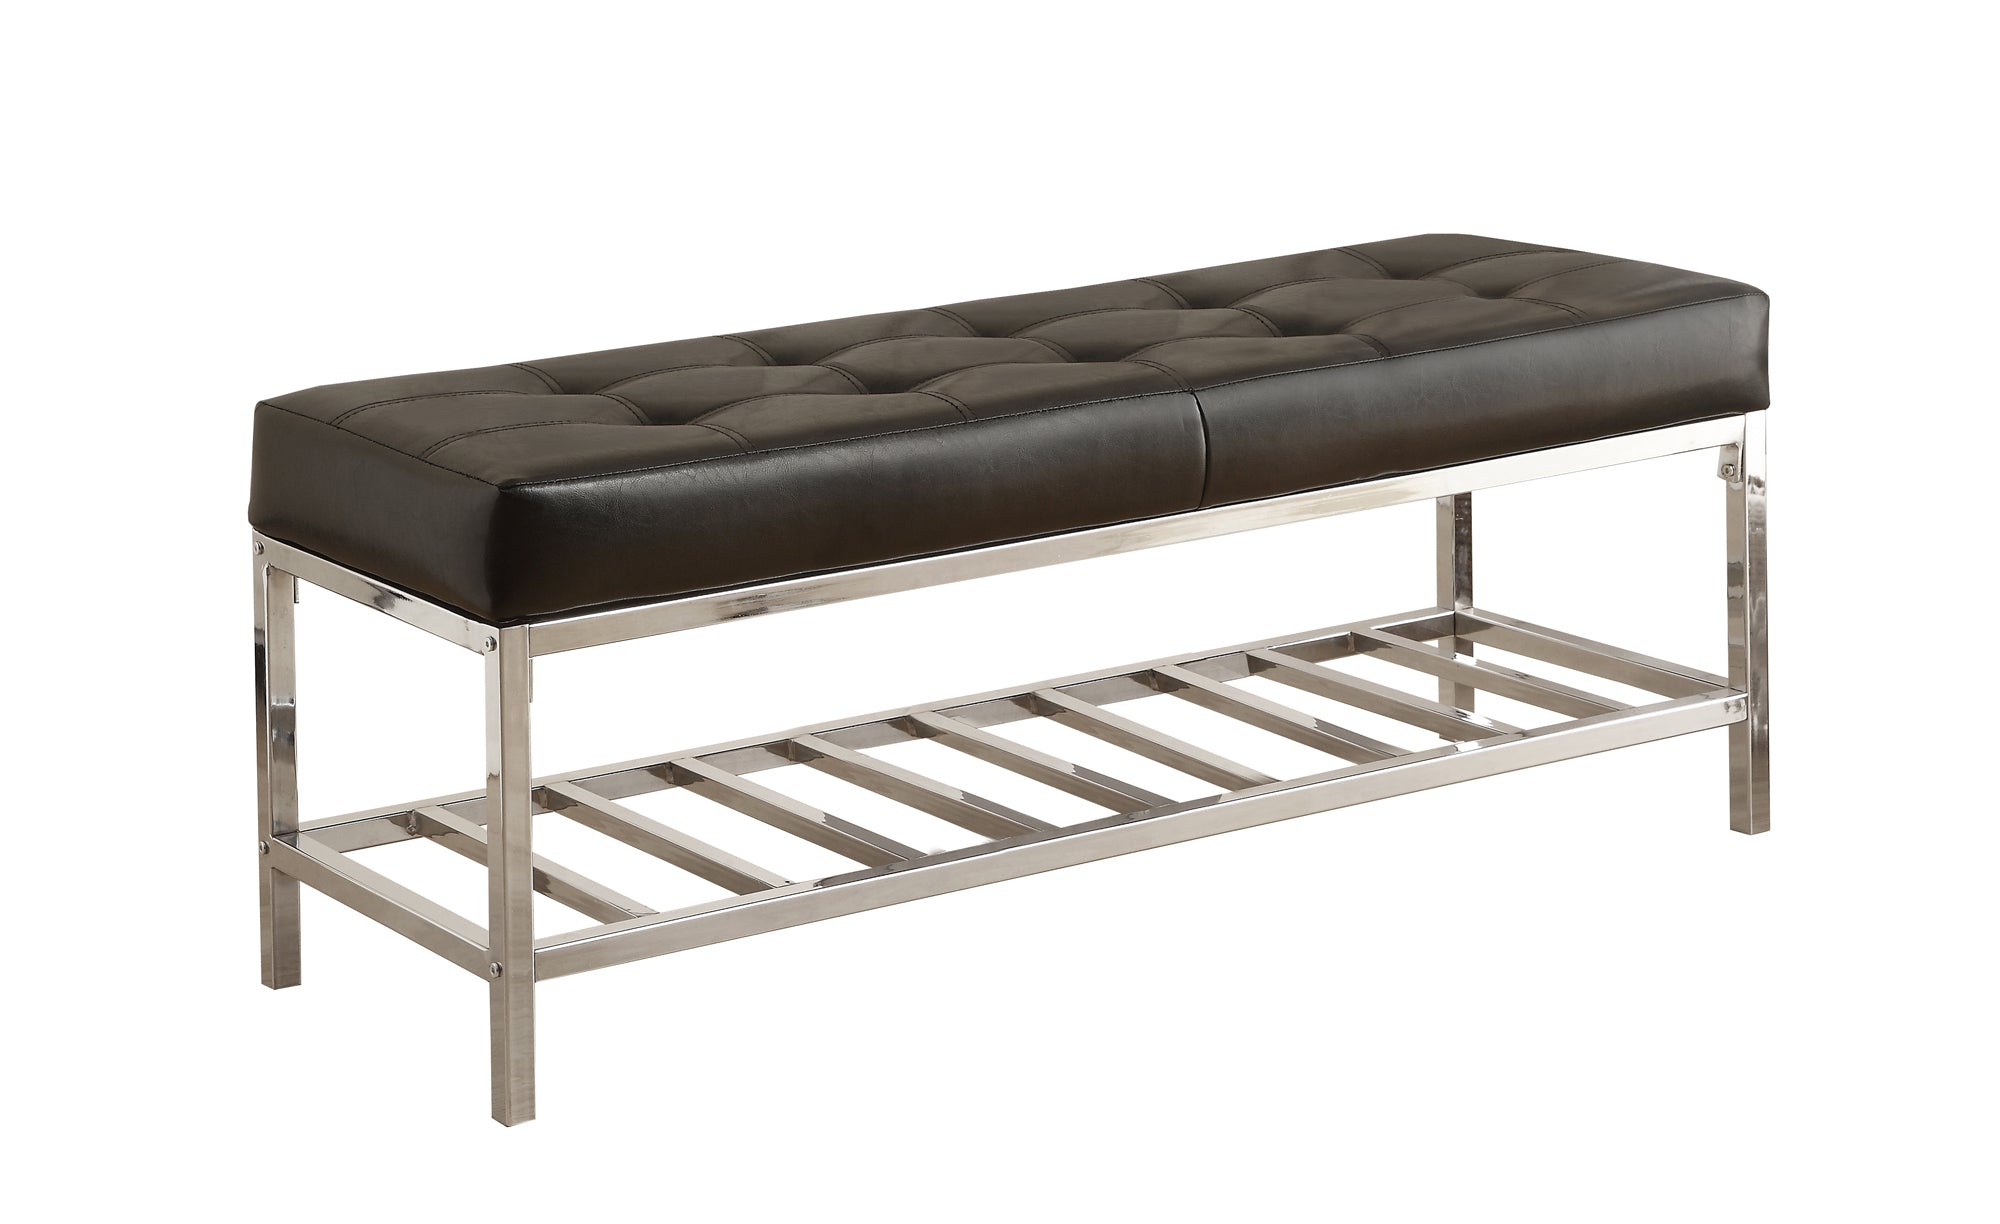 Bench - 48L / Black Leather-Look / Chrome Metal